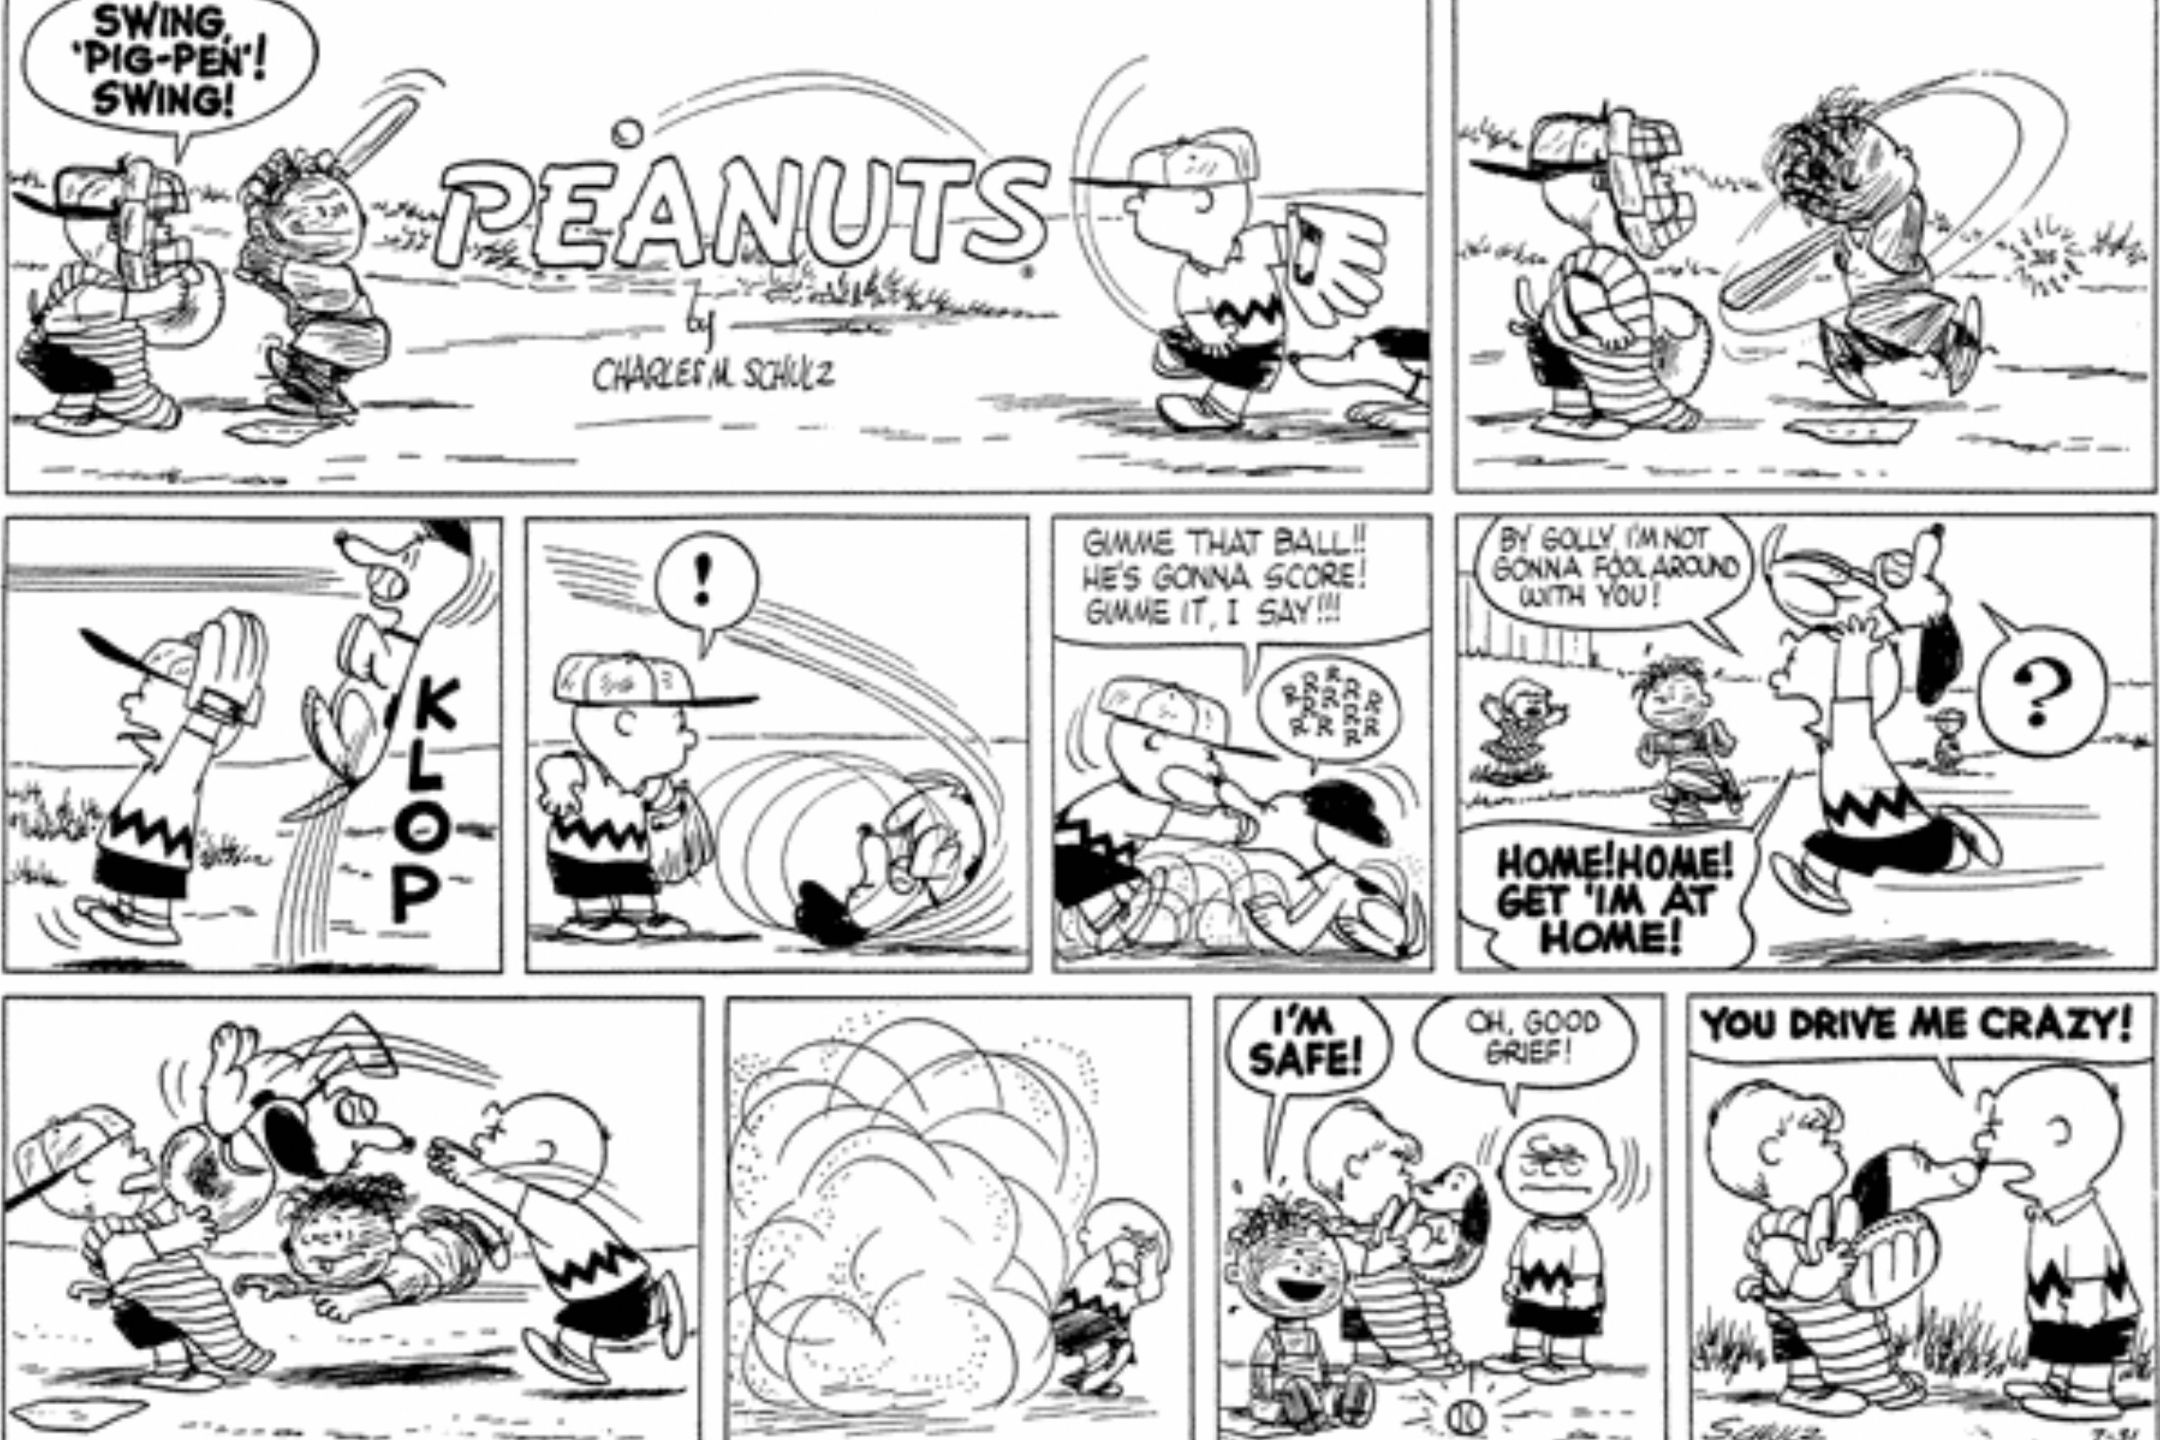 Charlie yelling at Snoopy while playing baseball In Peanuts